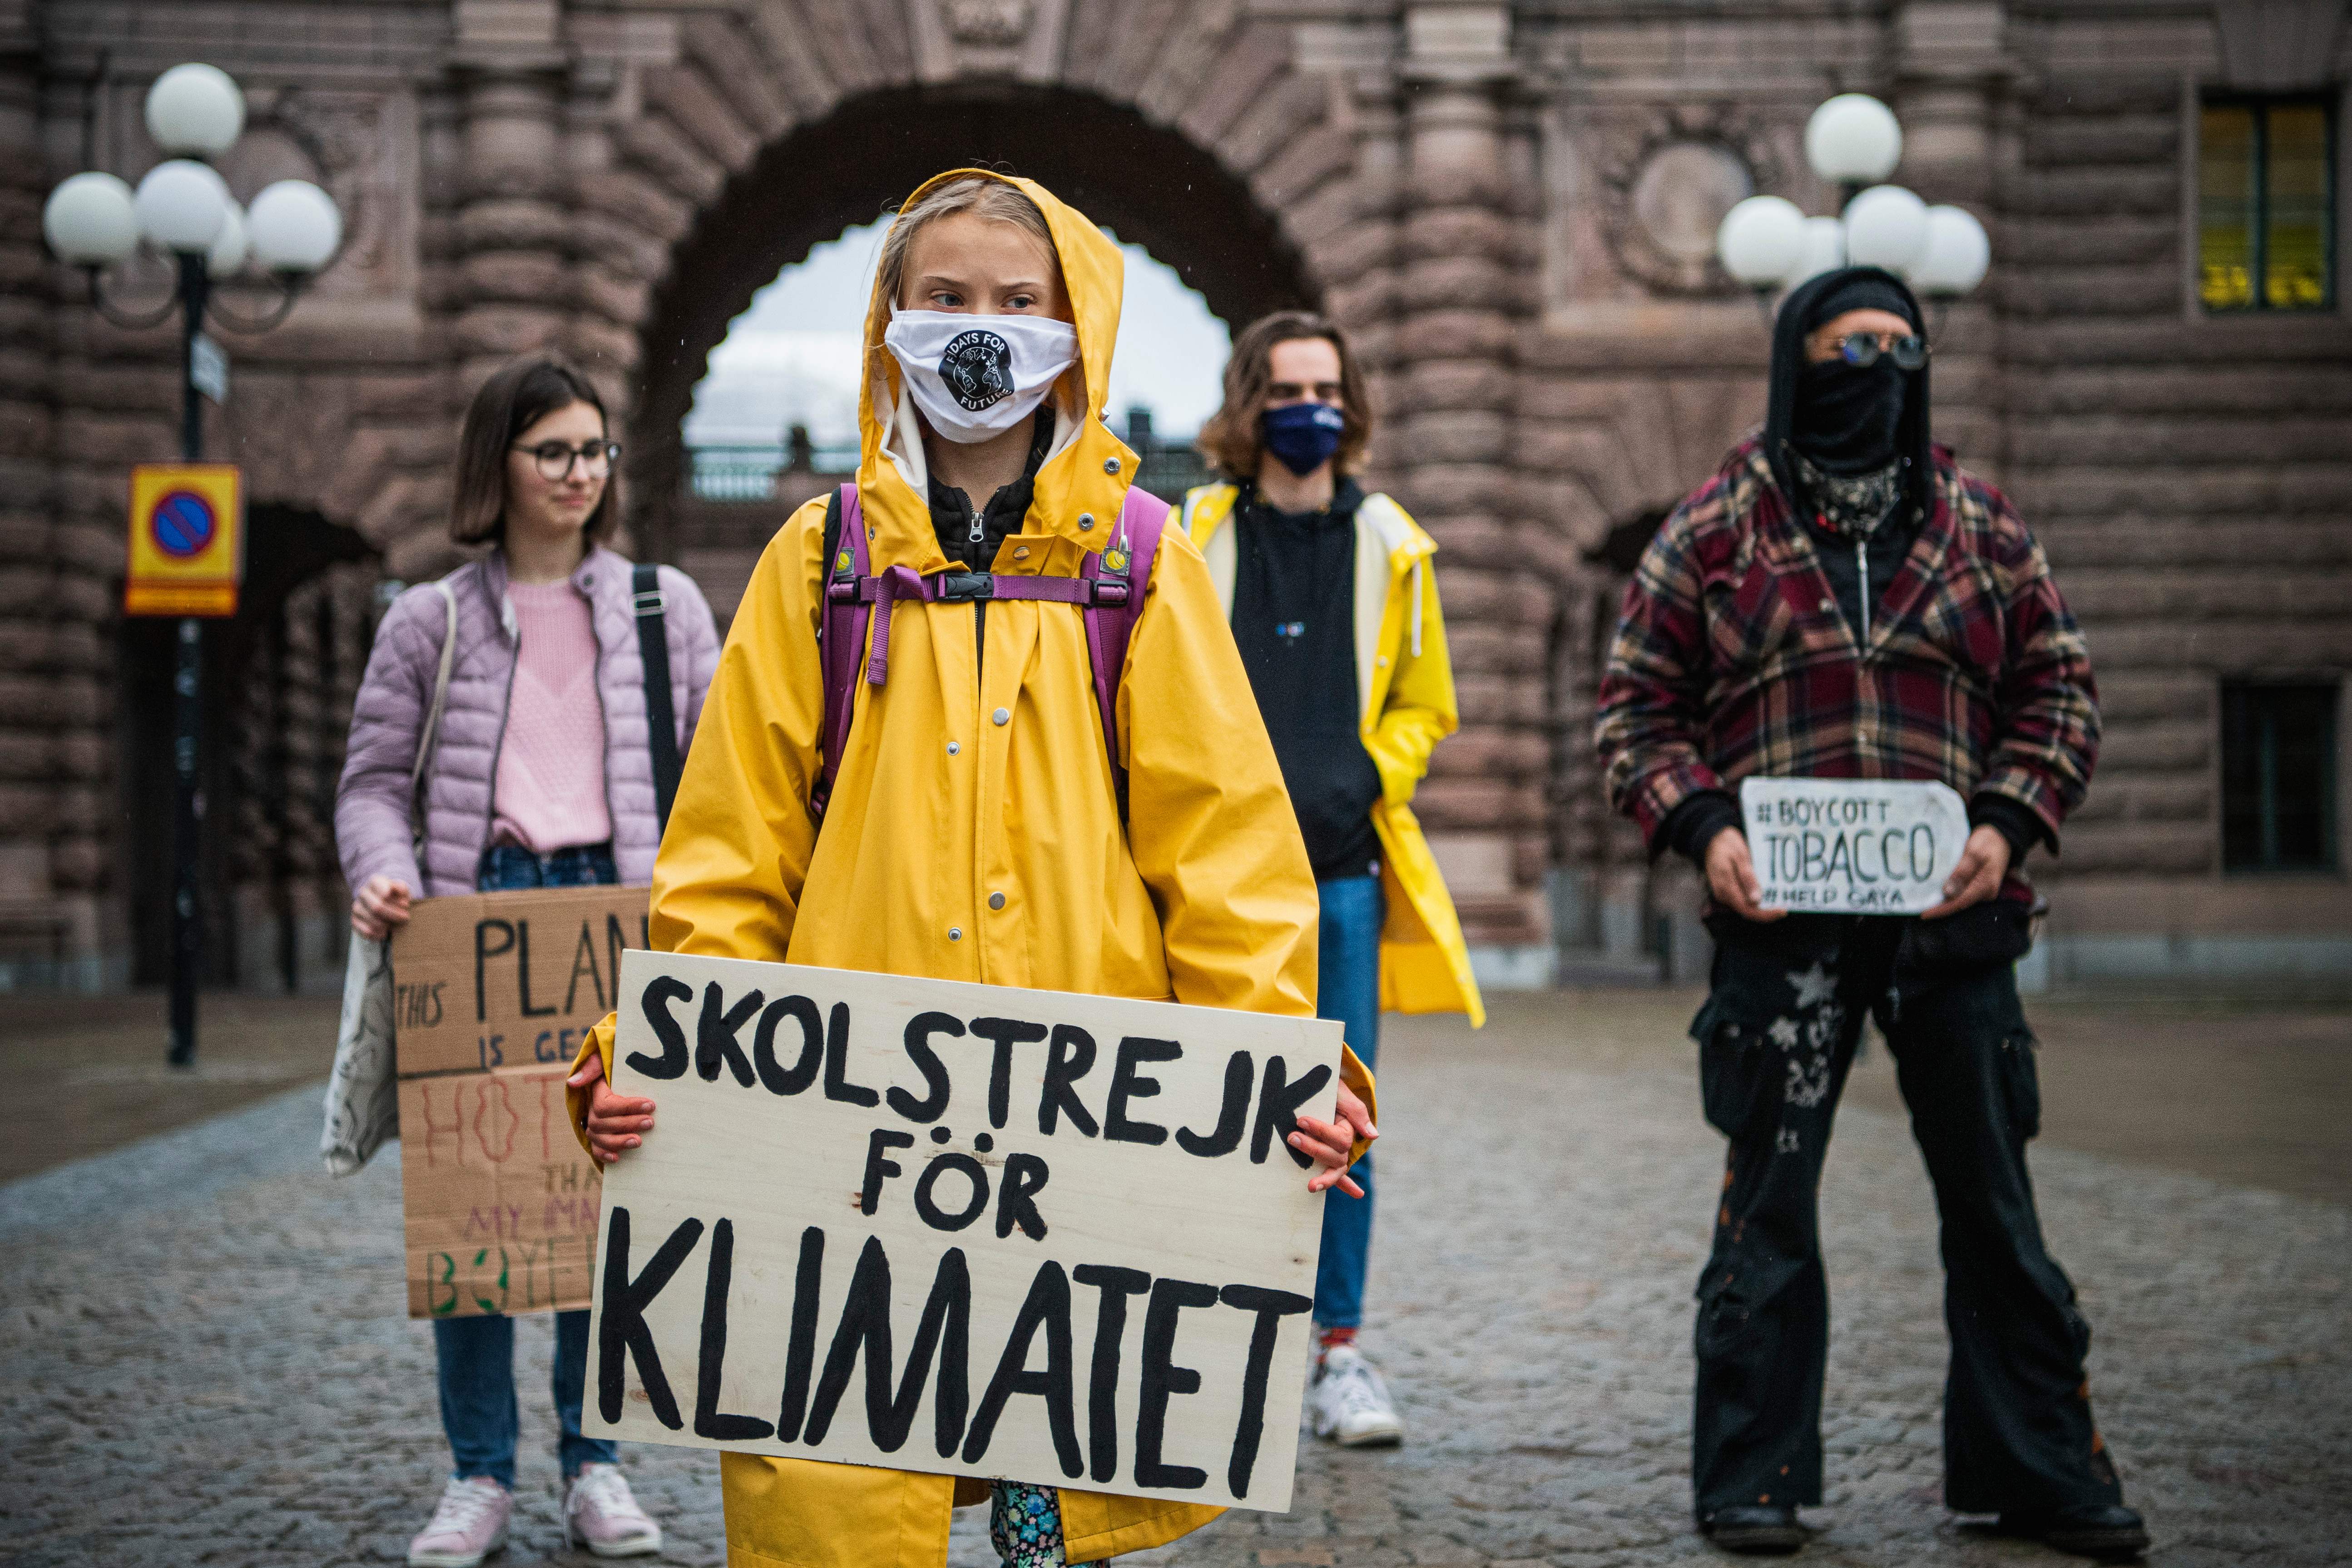 A statue of climate activist Greta Thunberg has provoked anger in the UK - CNBC